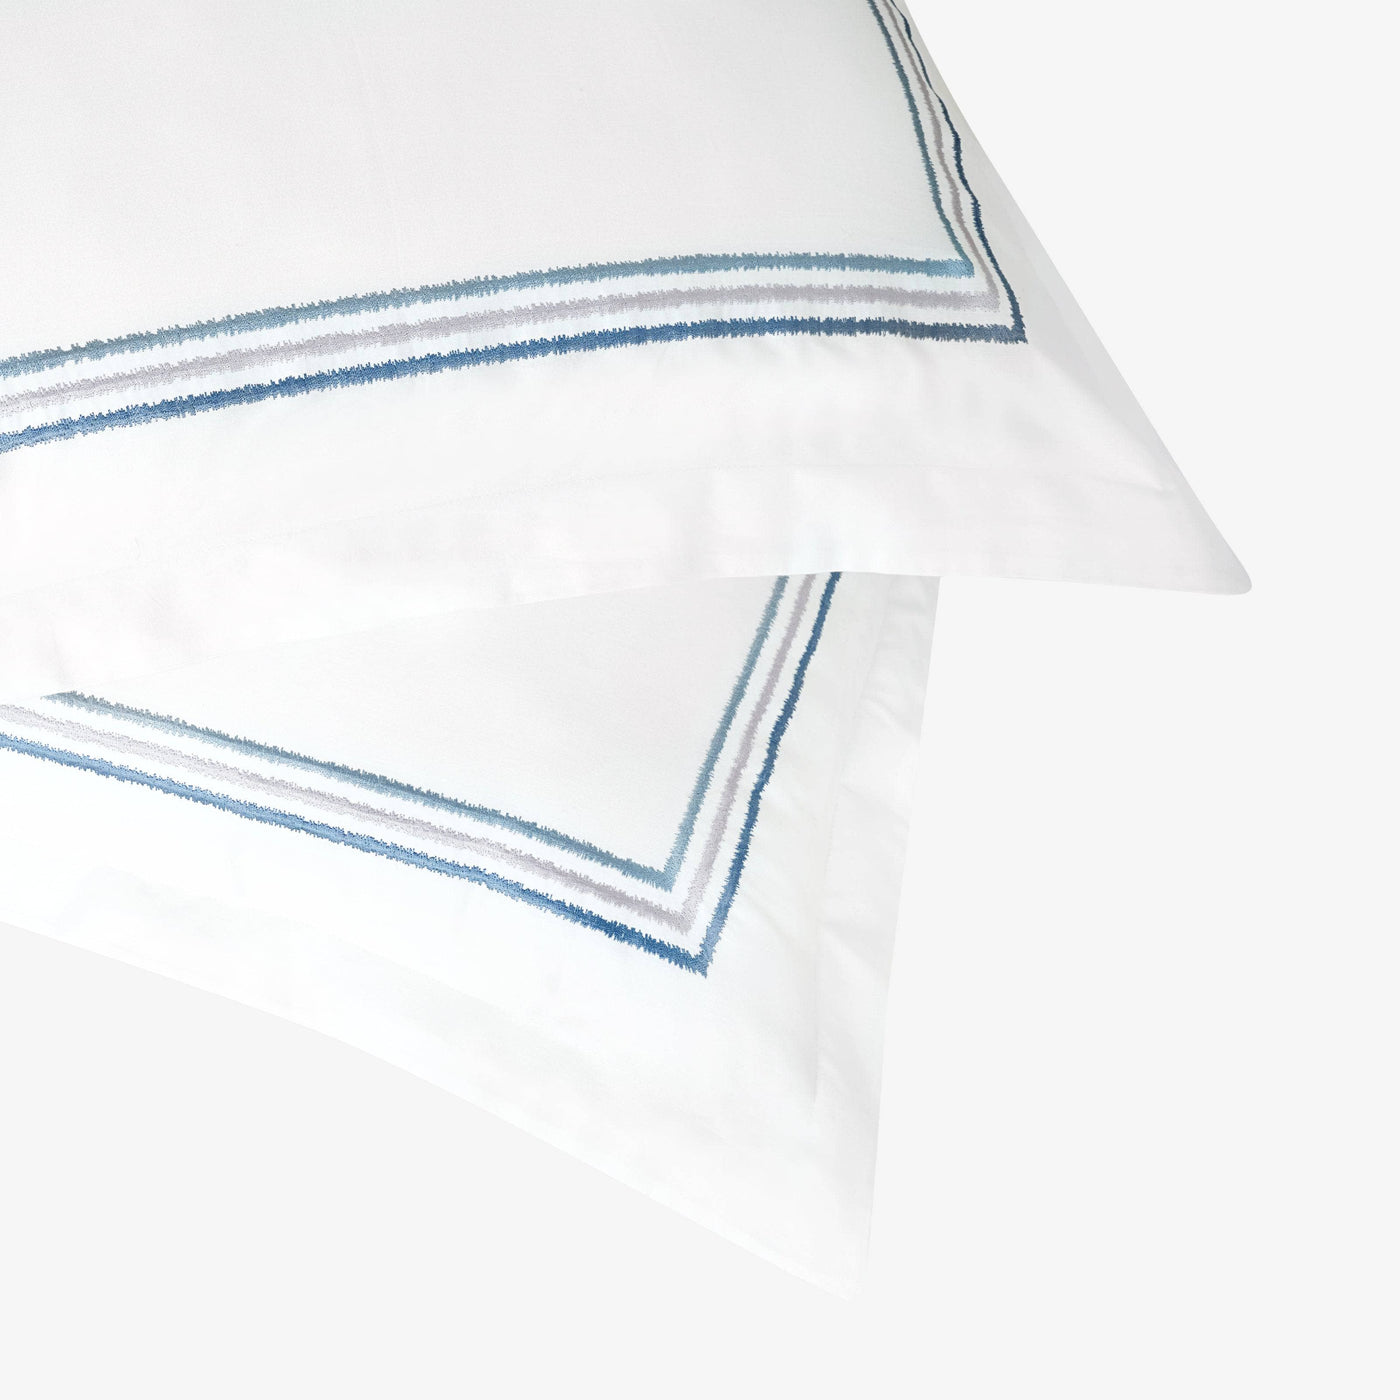 Darcy Embroidered 100% Turkish Cotton 210 TC Duvet Cover Set, White - Blue, Super King Size 4